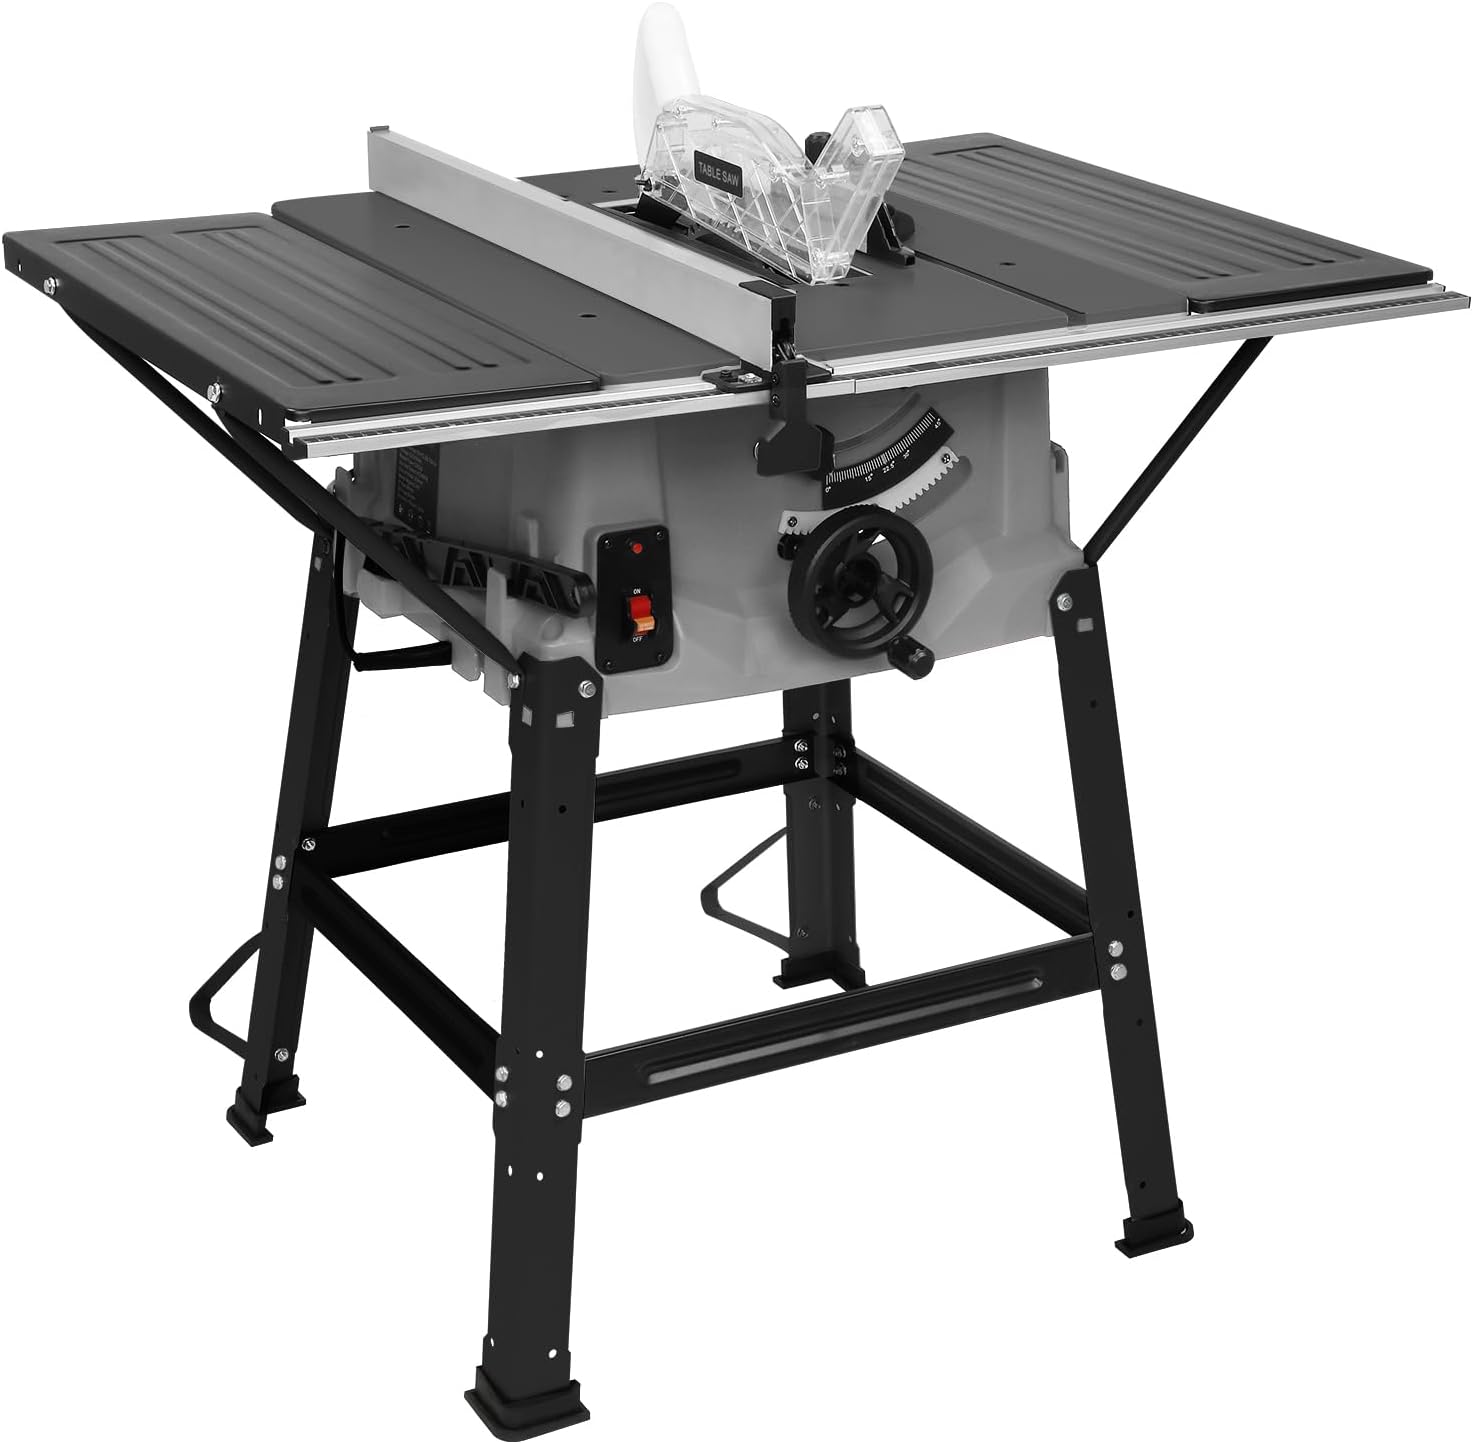 TUFFIOM 10inch Table Saw w/Port for Connecting Dust [...]